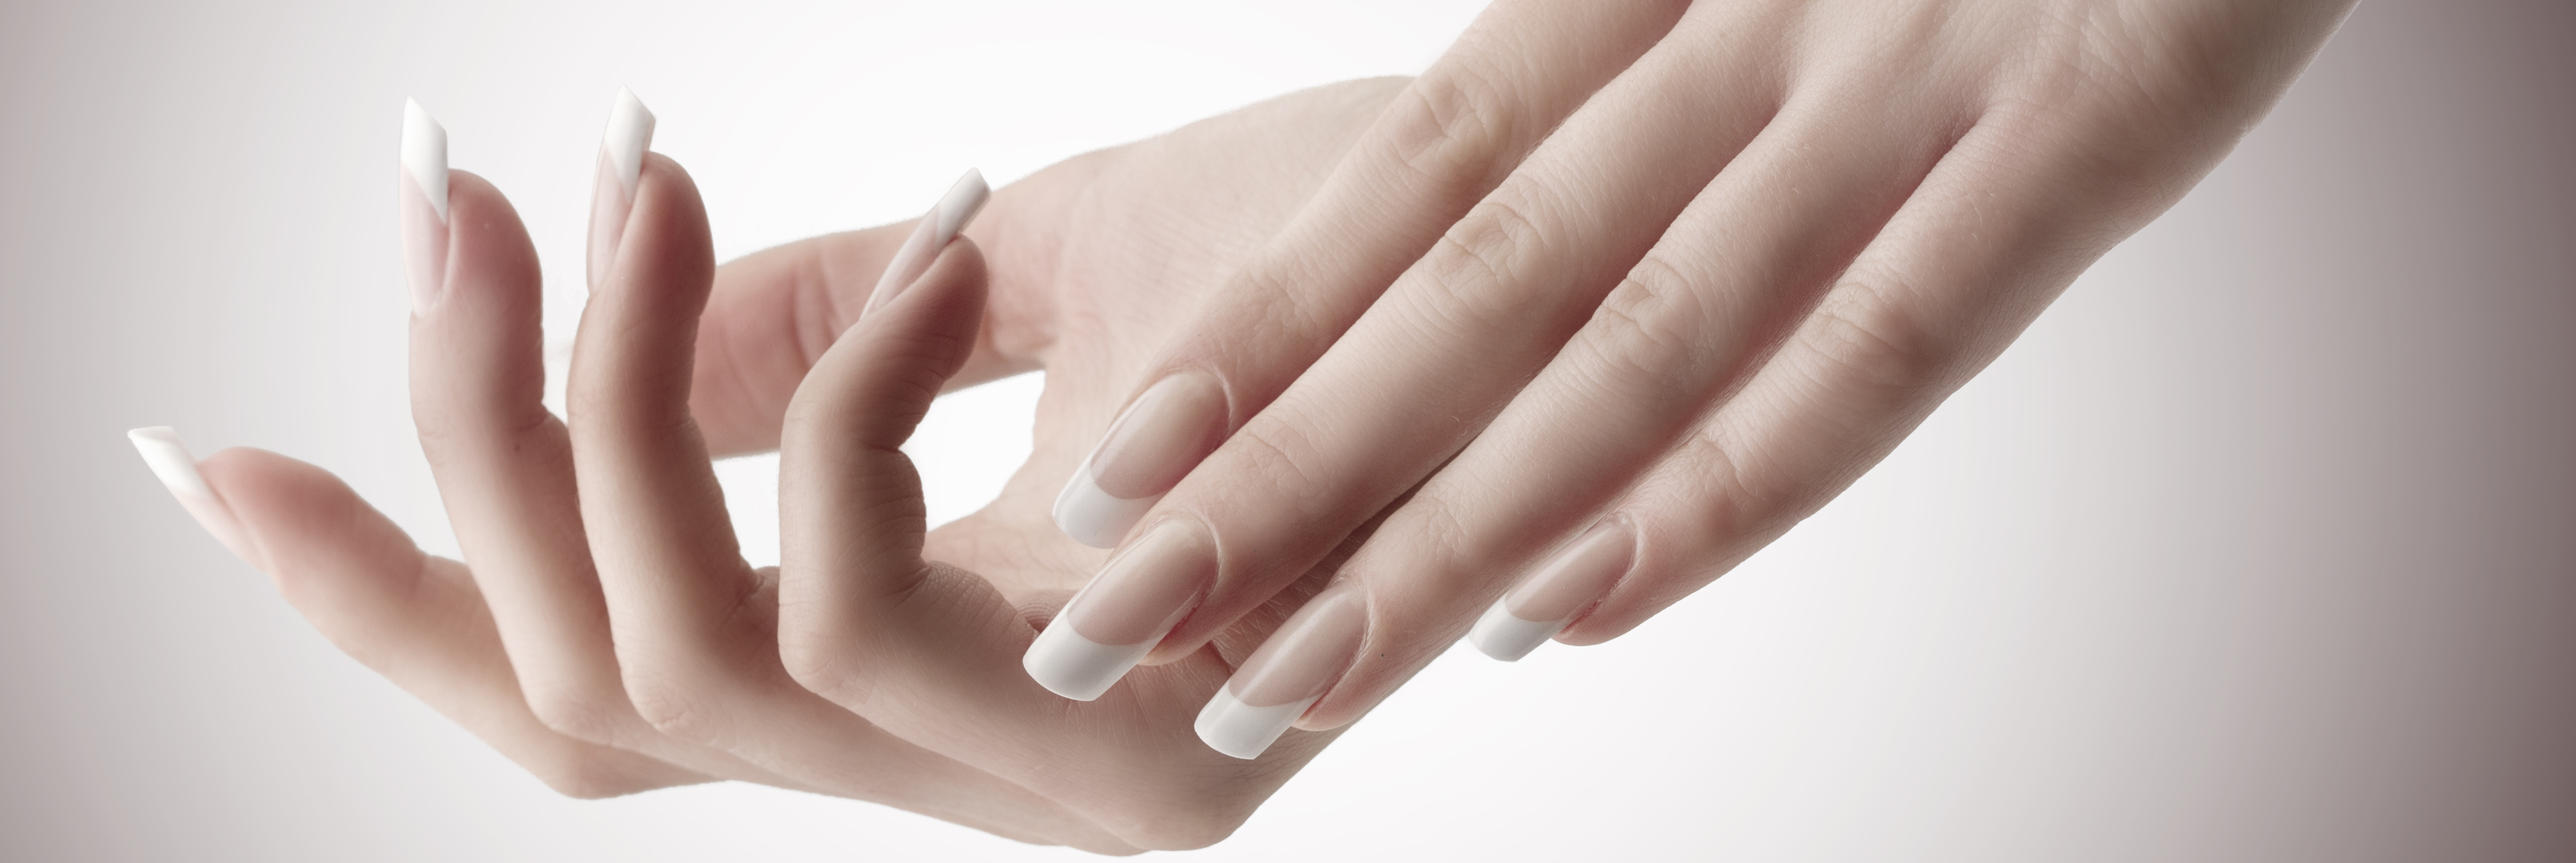 Is it bad to not tip at a nail salon? - Quora